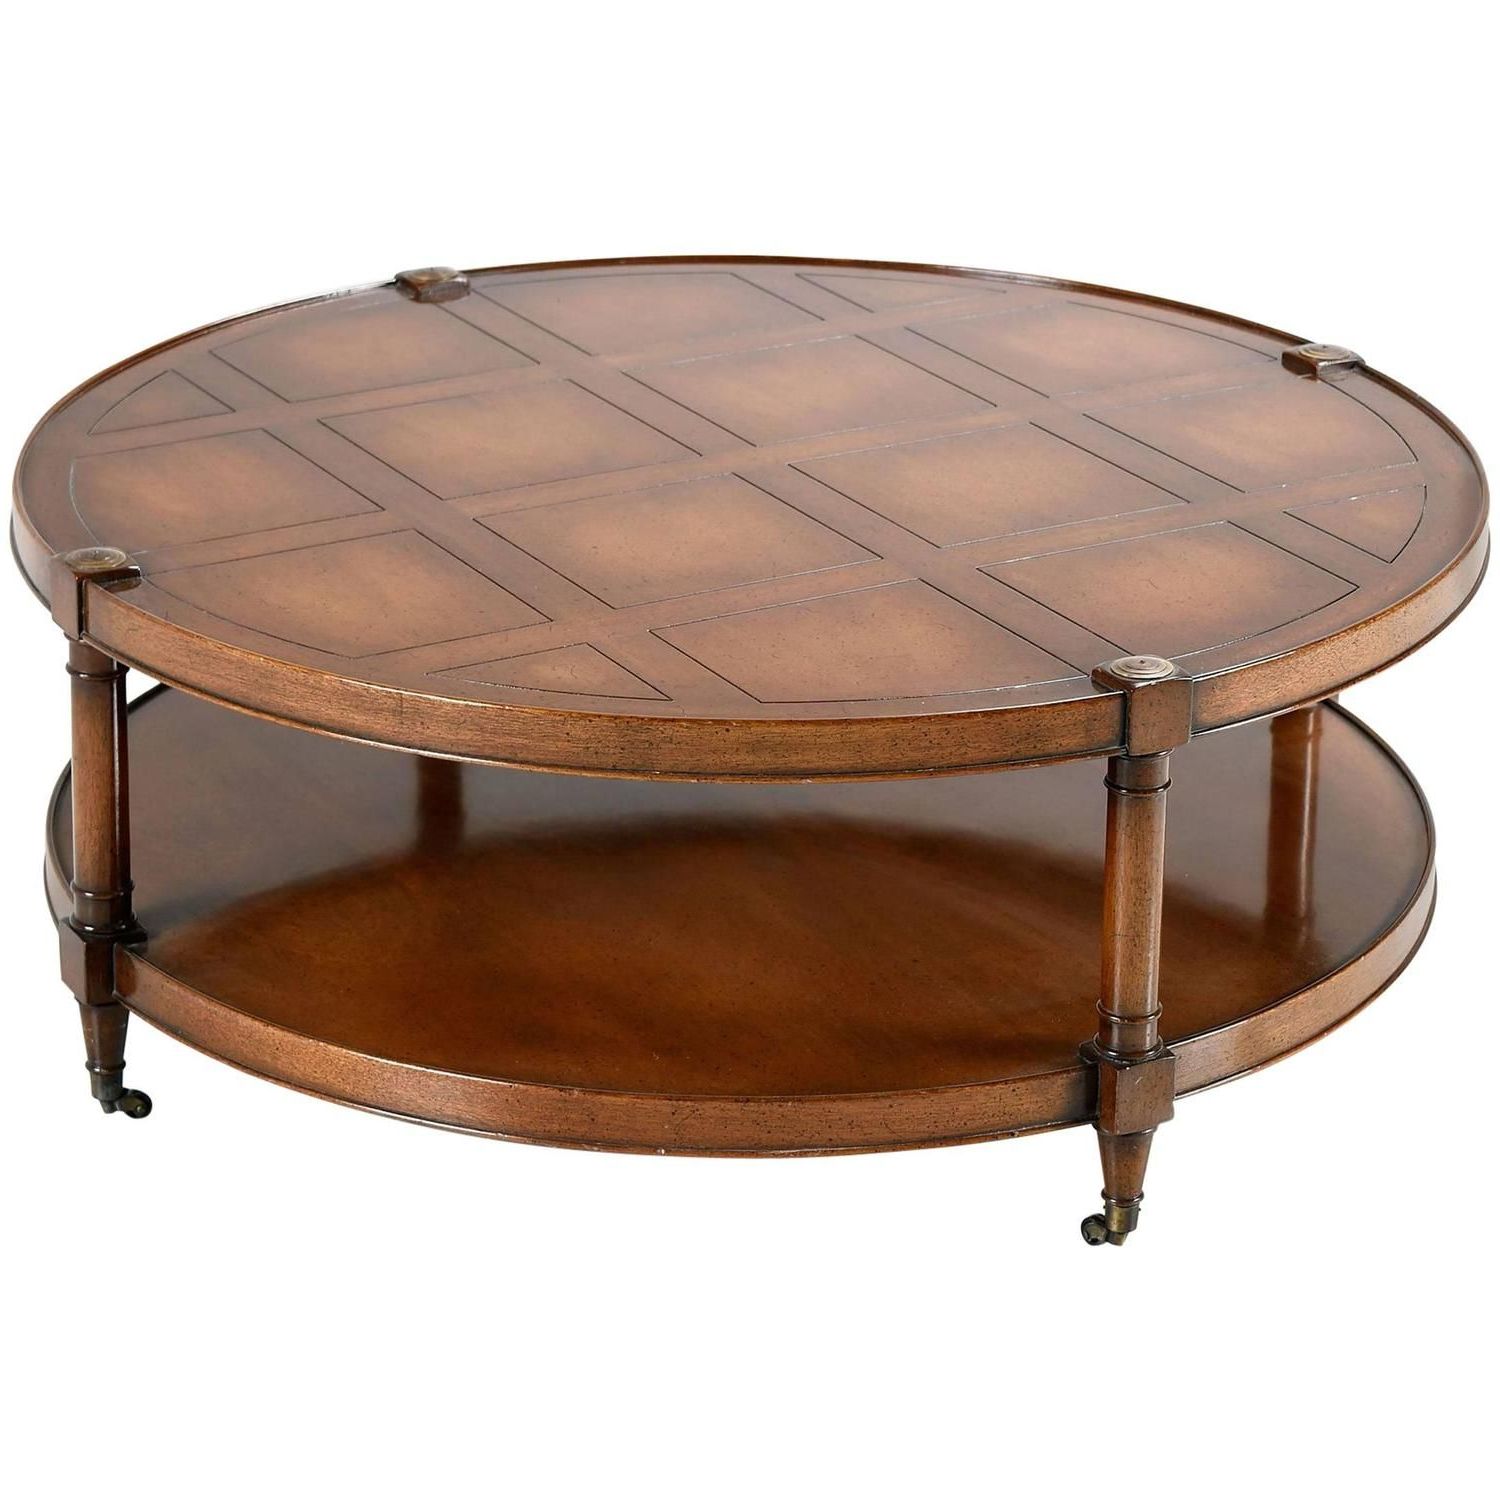 Most Recent American Heritage Round Coffee Tables With Regard To Heritage Mahogany Round Coffee Table On Casters (View 12 of 15)